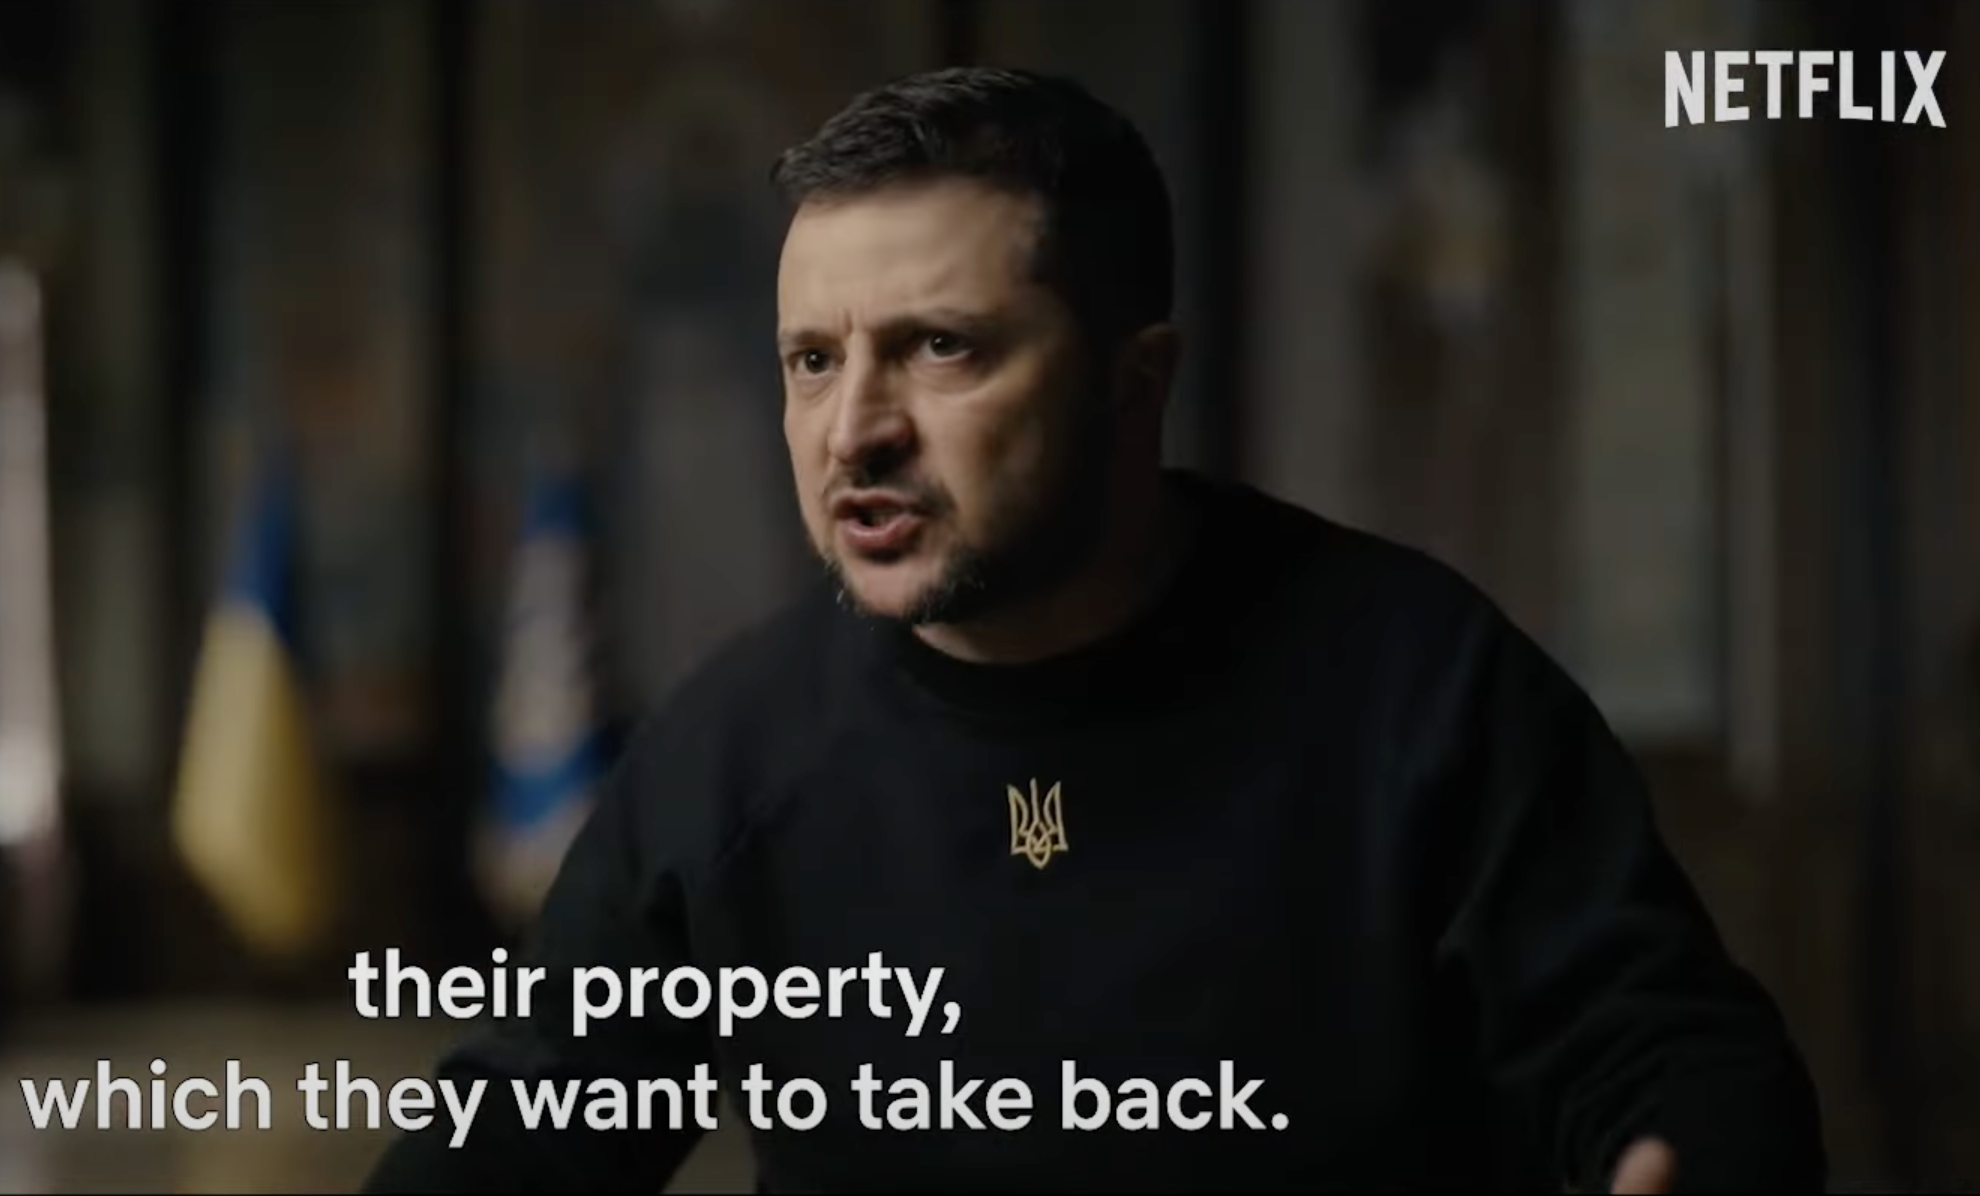 Netflix to release a documentary series about the Cold War soon: the trailer featuring Zelenskyy published on YouTube